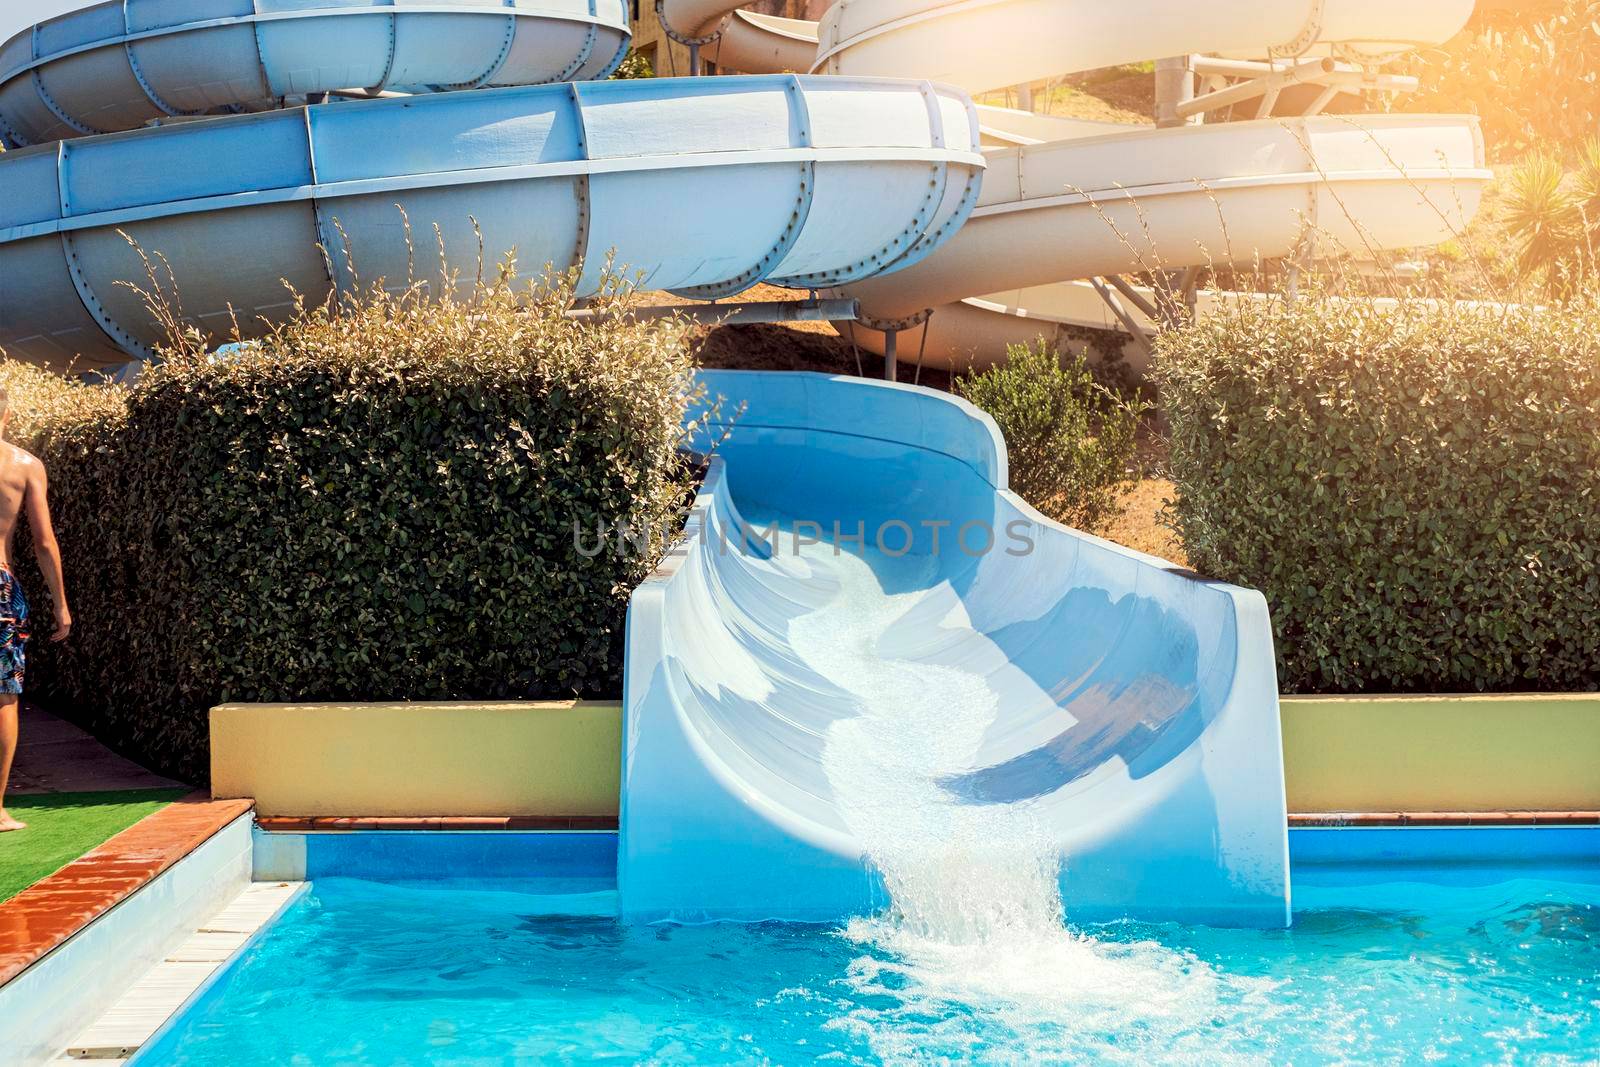 Water park, bright slides with a pool. A water park on a summer day.